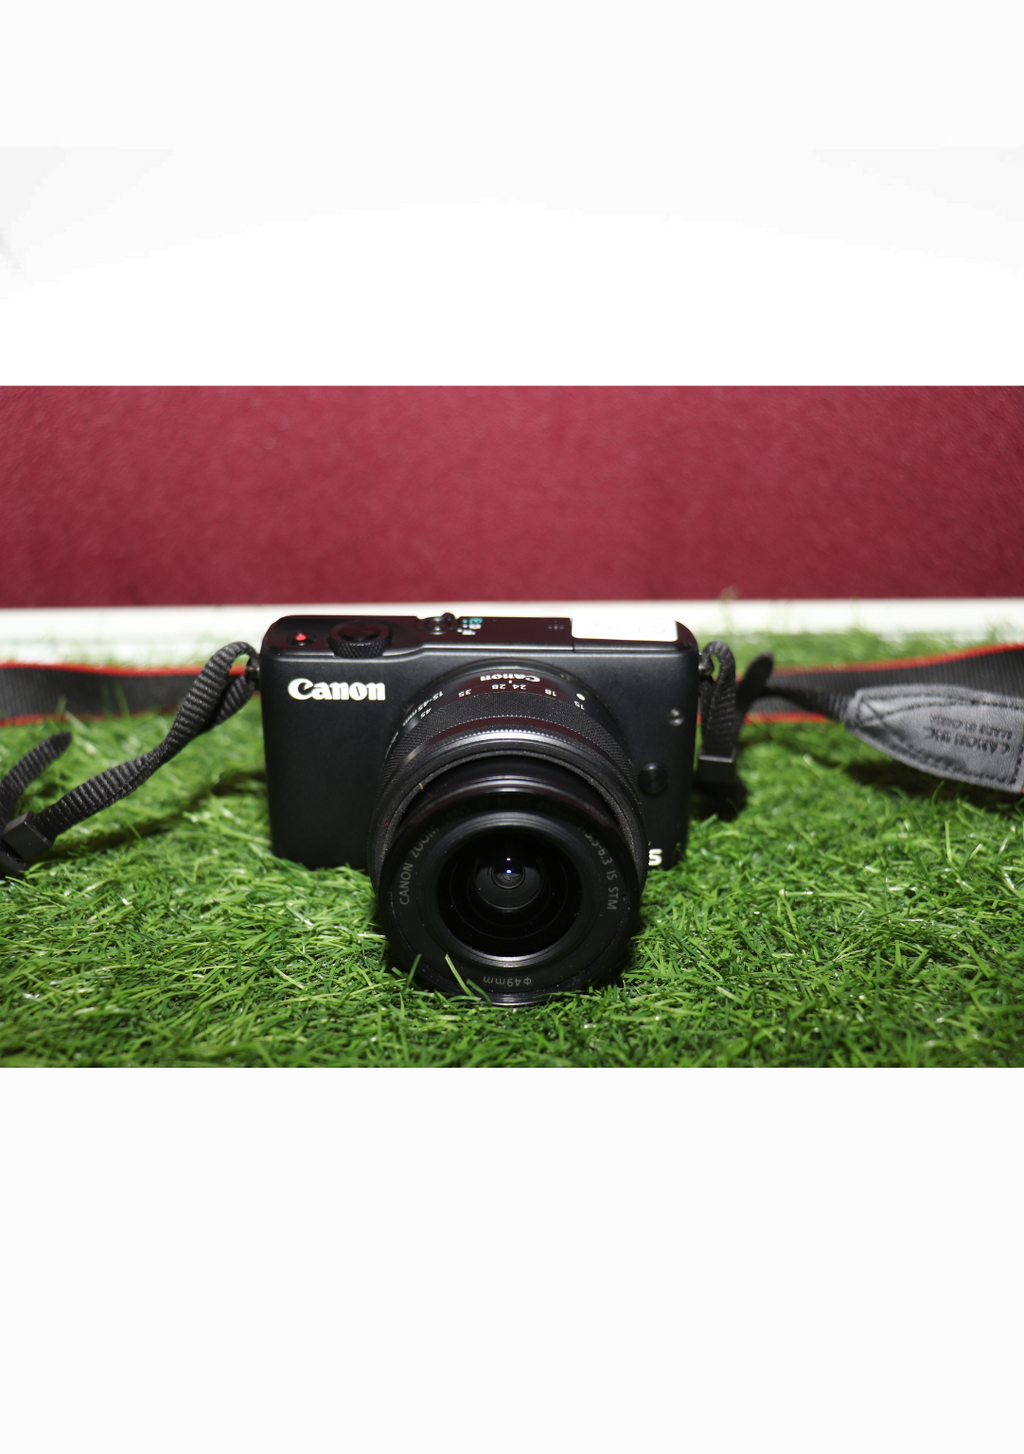 Used Canon M10 with 15-45mm lens